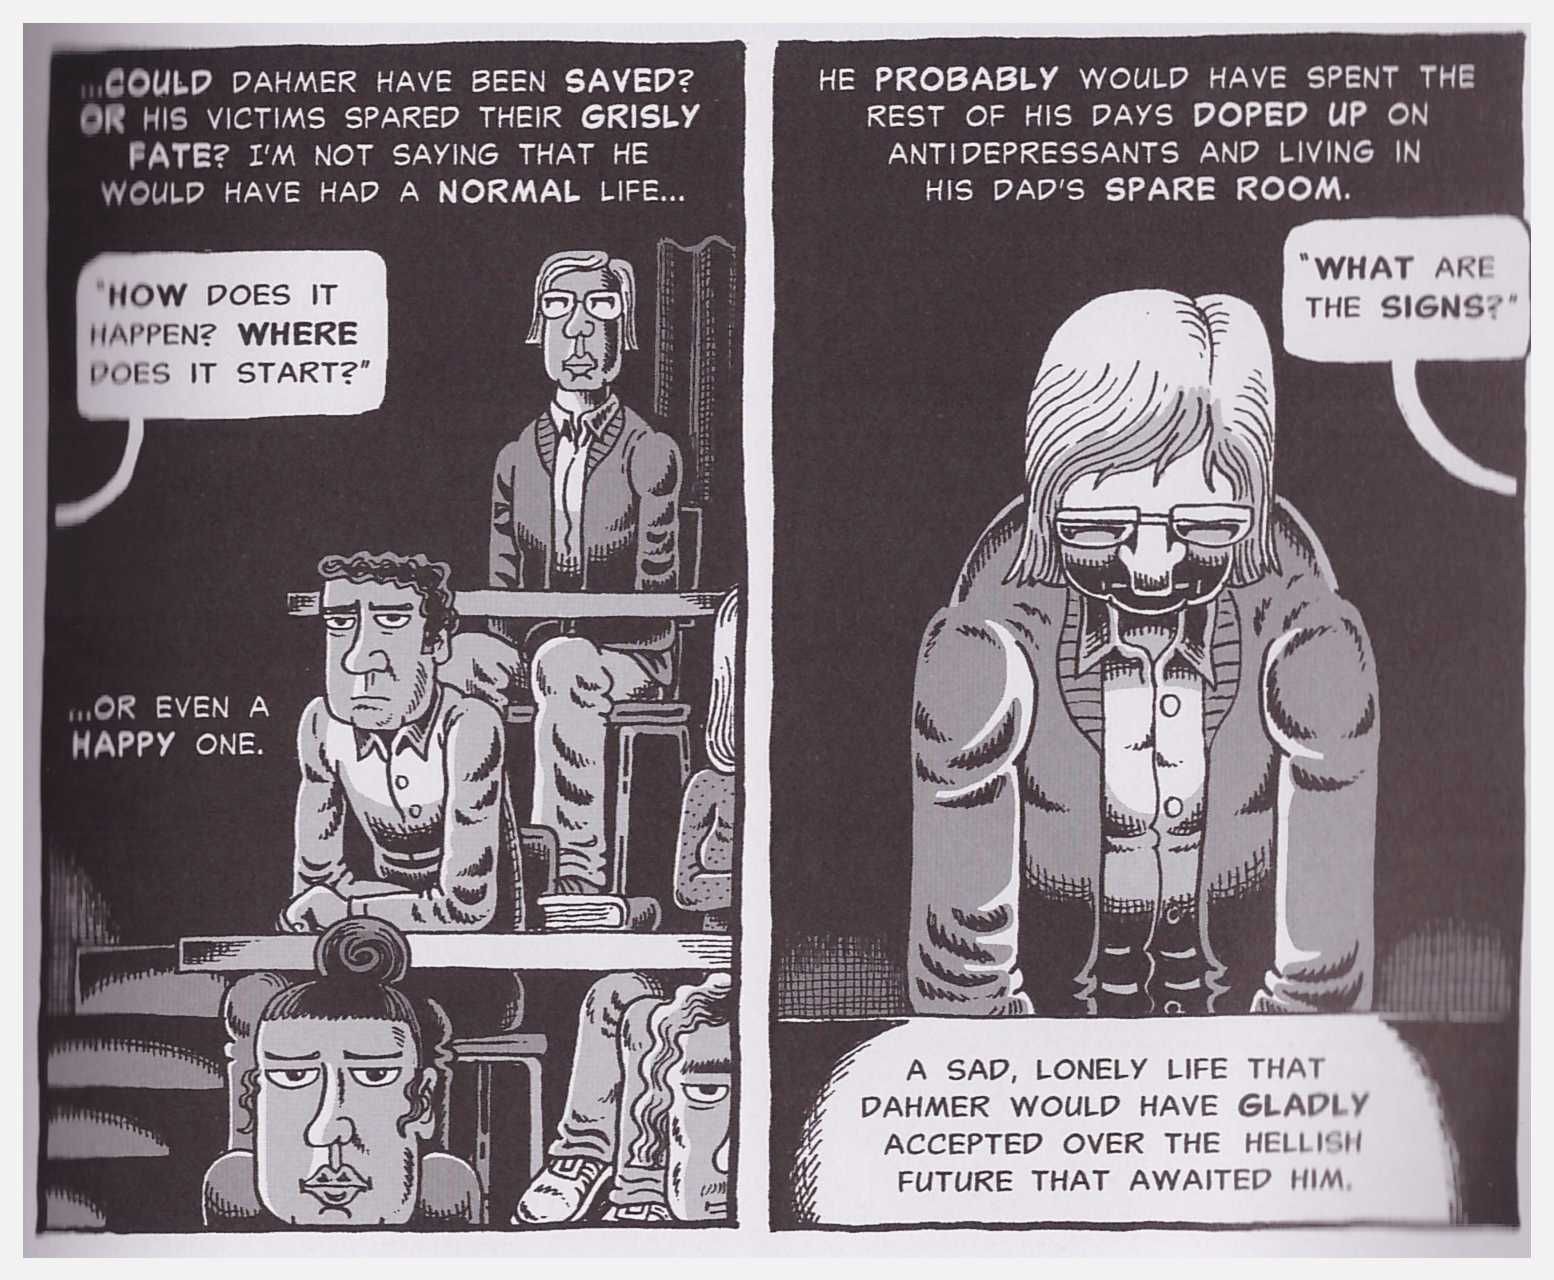 Two panels from the graphic novel "My Friend Dahmer." In the first panel, Dahmer sits in a lecture hall behind two rows of students. A speech bubble coming from off-screen reads "How does it happen? Where does it start?" Non-bubbled text reads "Could Dahmer have been saved? Or his victims spared their grisly fate? I'm not saying that he would have had a normal life, or even a happy one." The second panel shows a closeup of Dahmer in his seat, looking down. A speech bubbled reads, "What are the signs?" Non-bubbled text reads, "He probably would have spent the rest of his days doped up on antidepressants and living in his dad's spare room. A sad, lonely life that Dahmer would have gladly accepted over the hellish future that awaited him."